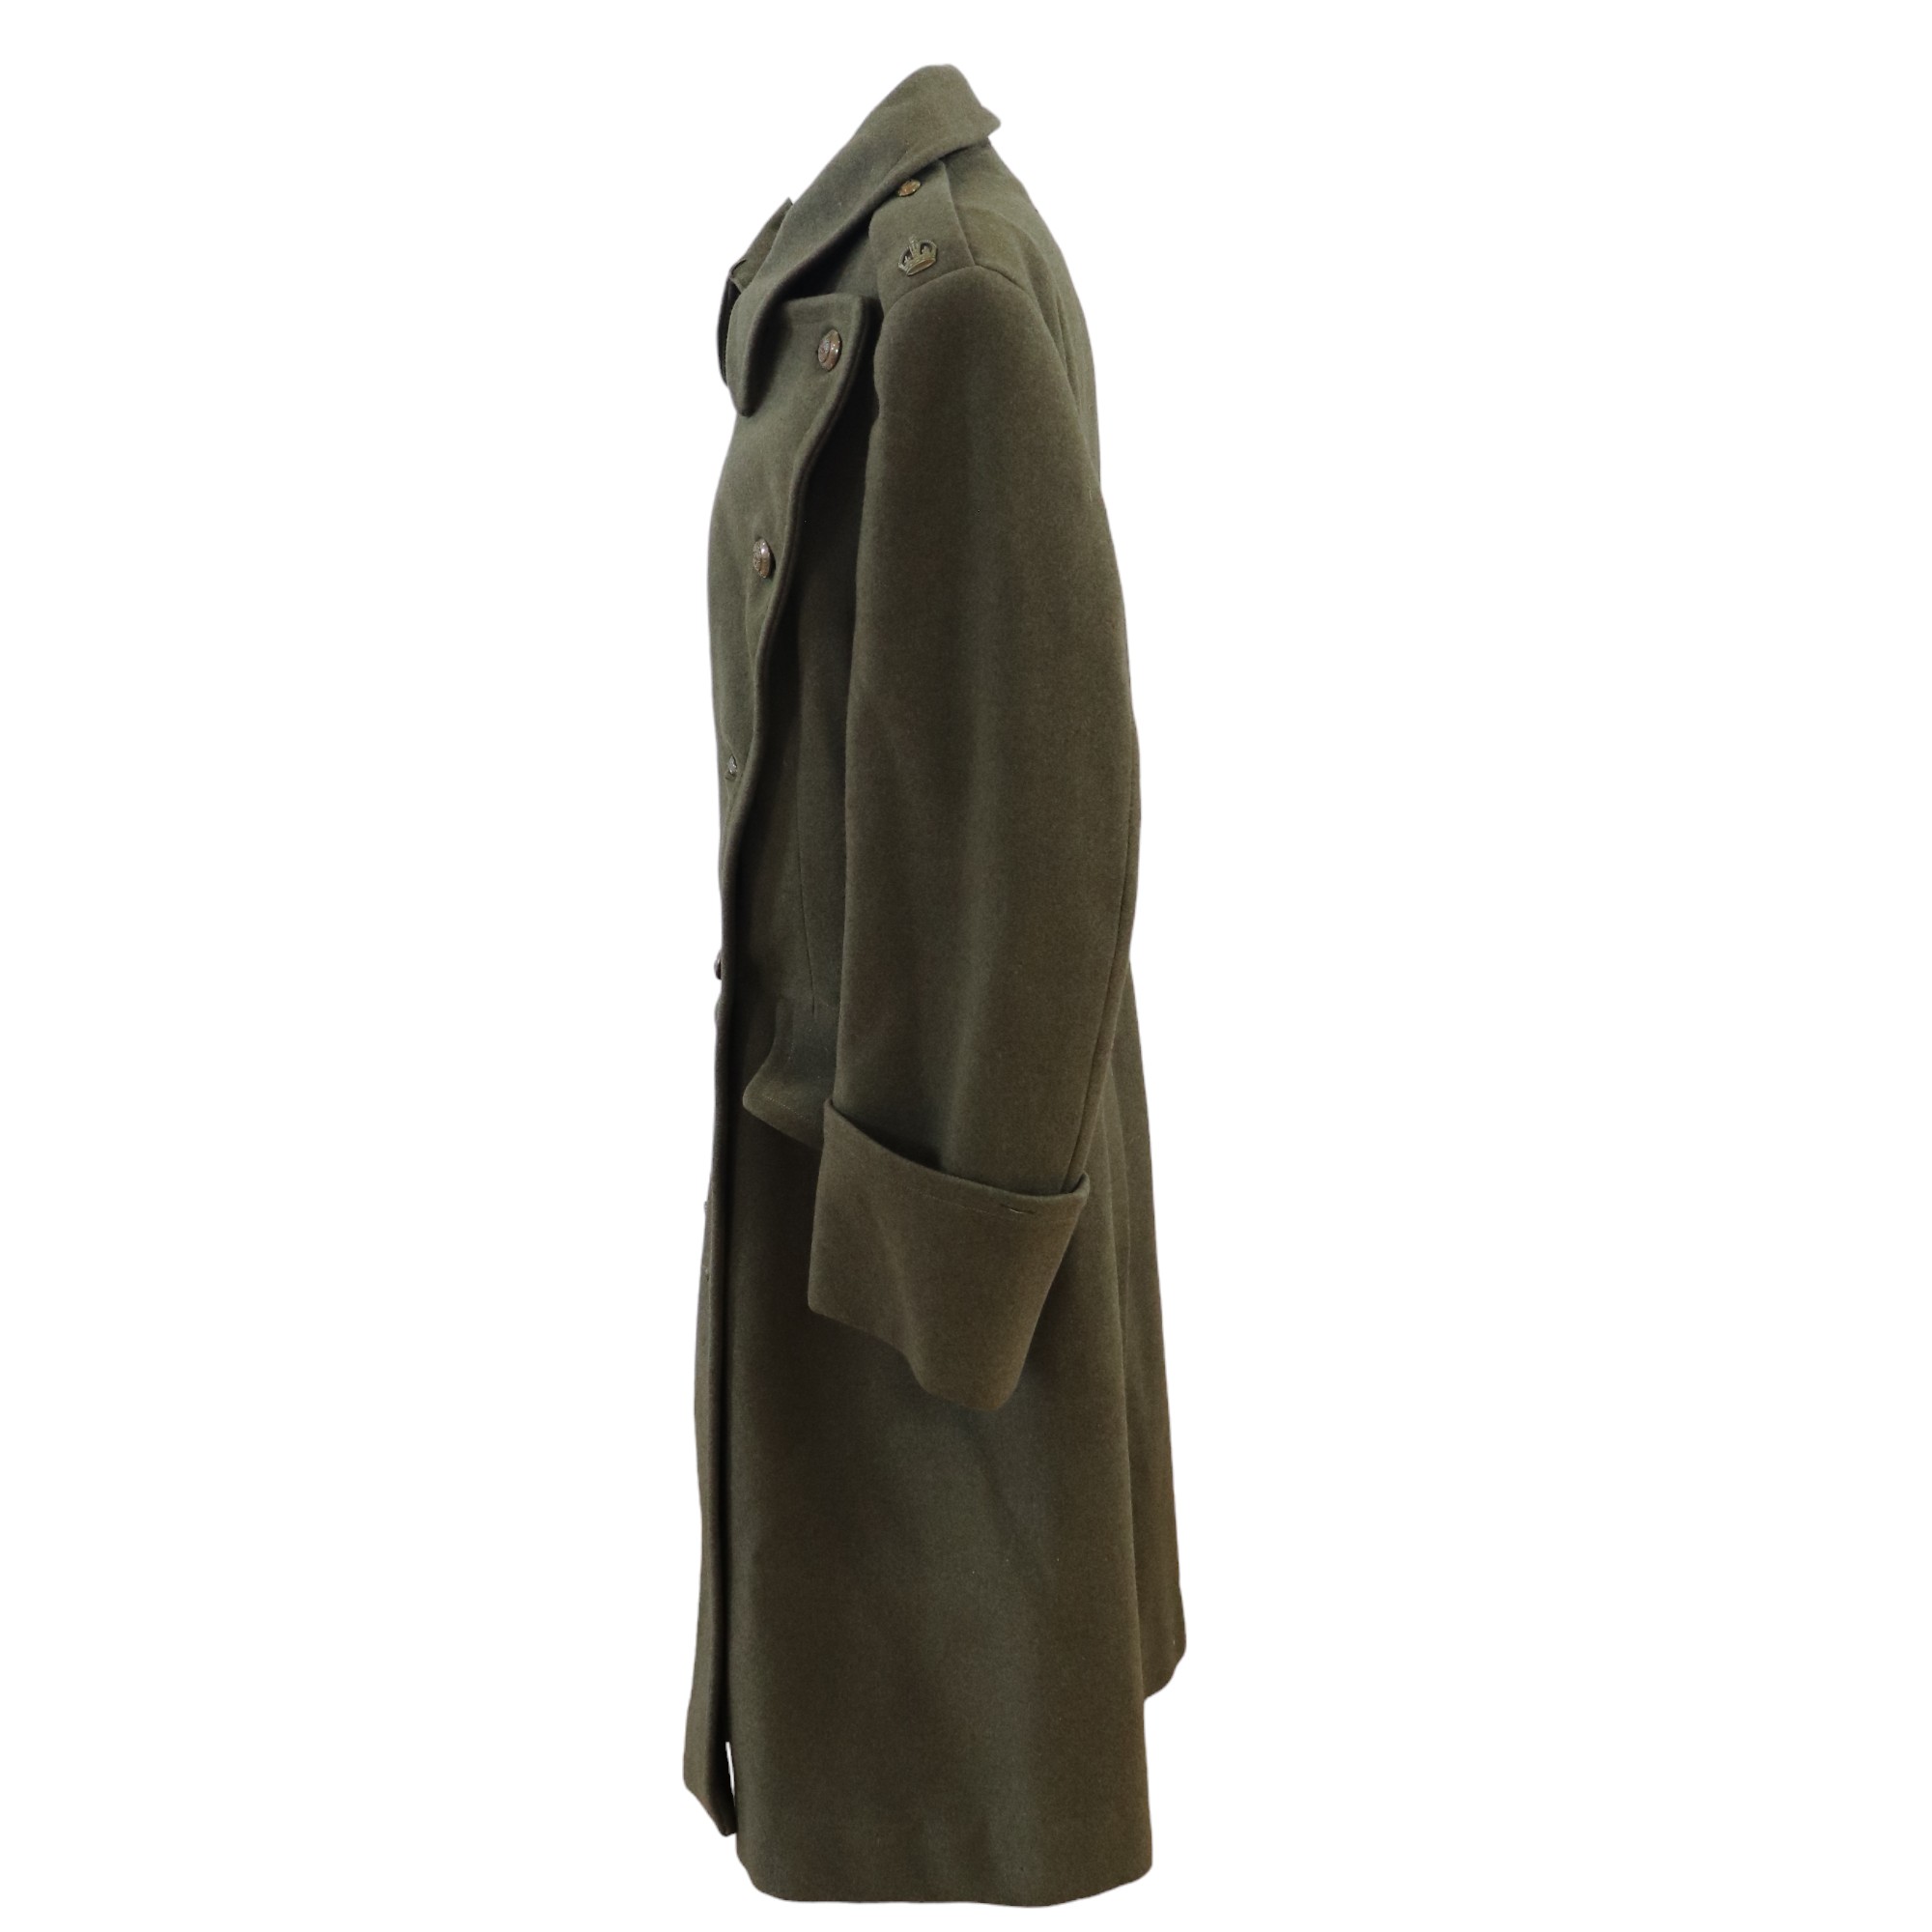 A 1943 dated army officer's greatcoat - Image 2 of 5